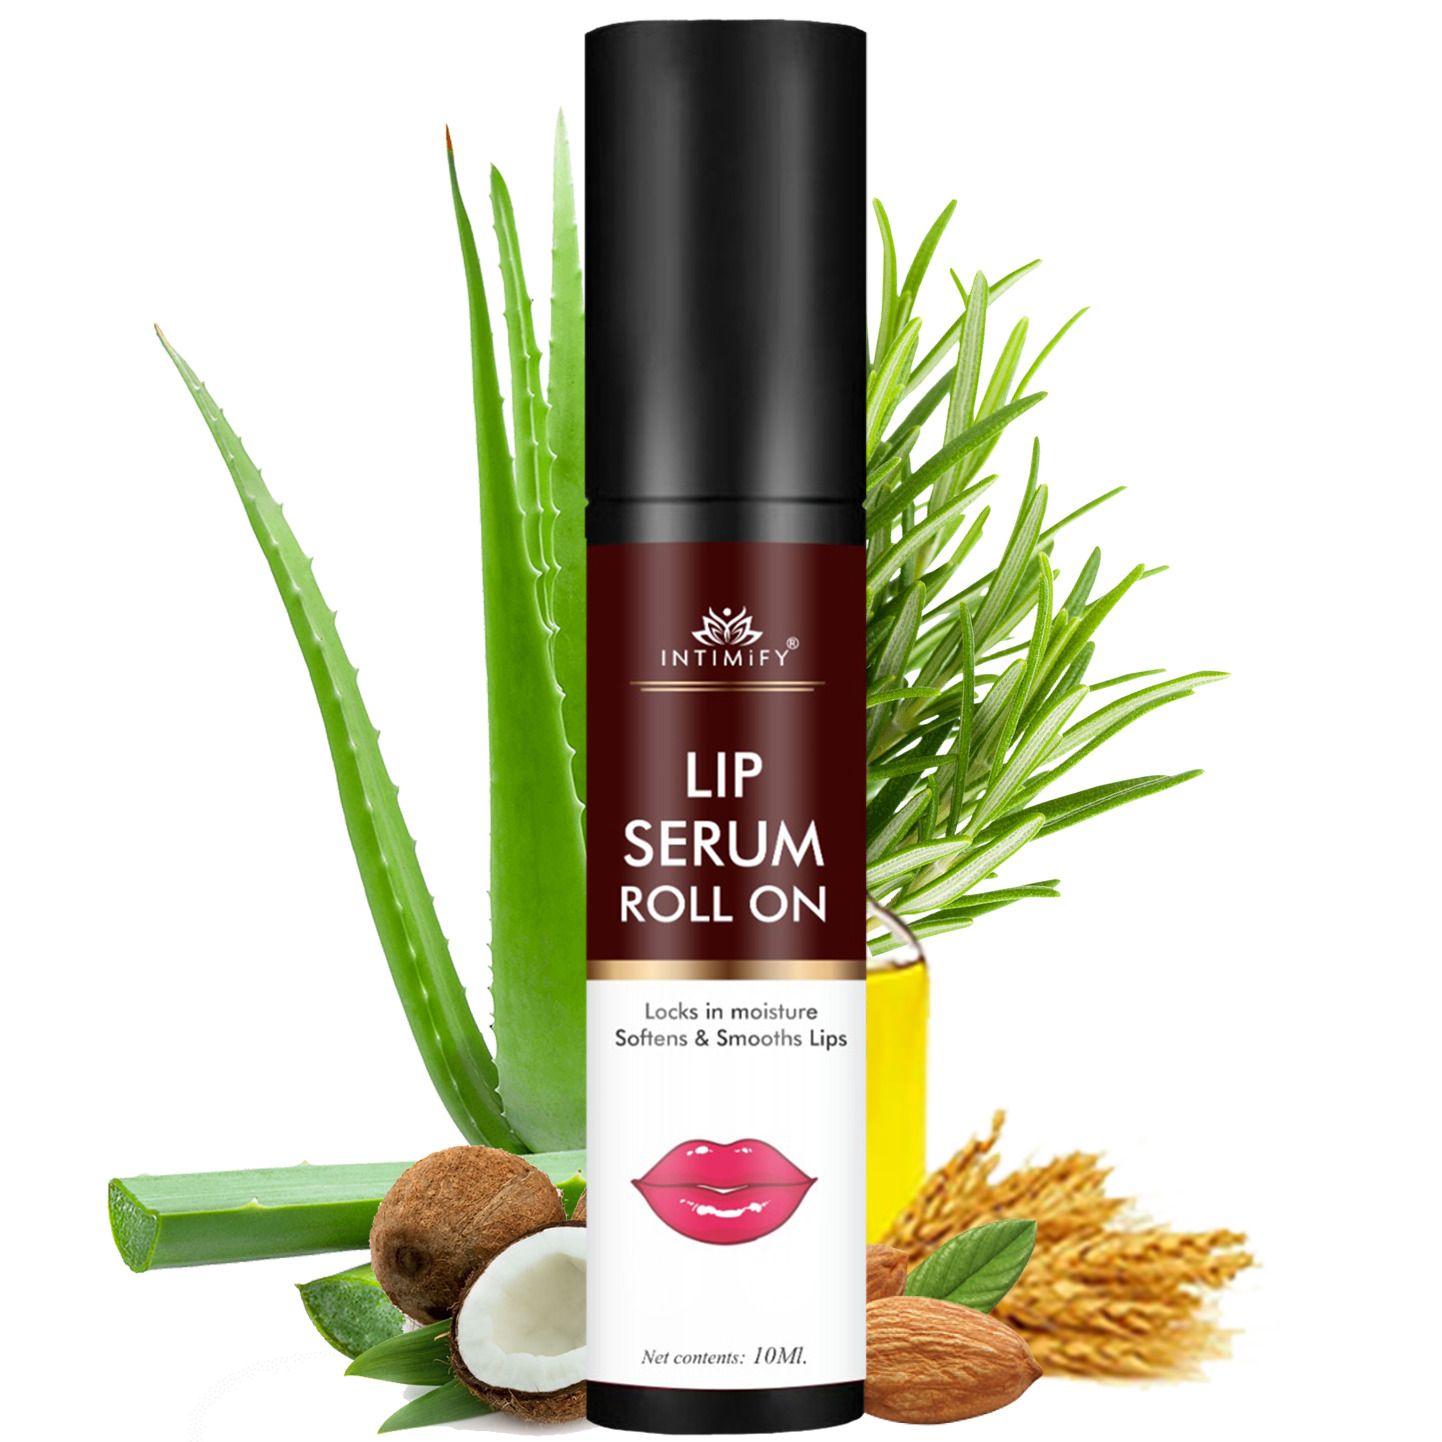 Intimify Lip Serum Roll On Makes Lips Soft and Supple, Heal Cracked Lips, Moisturize Lips